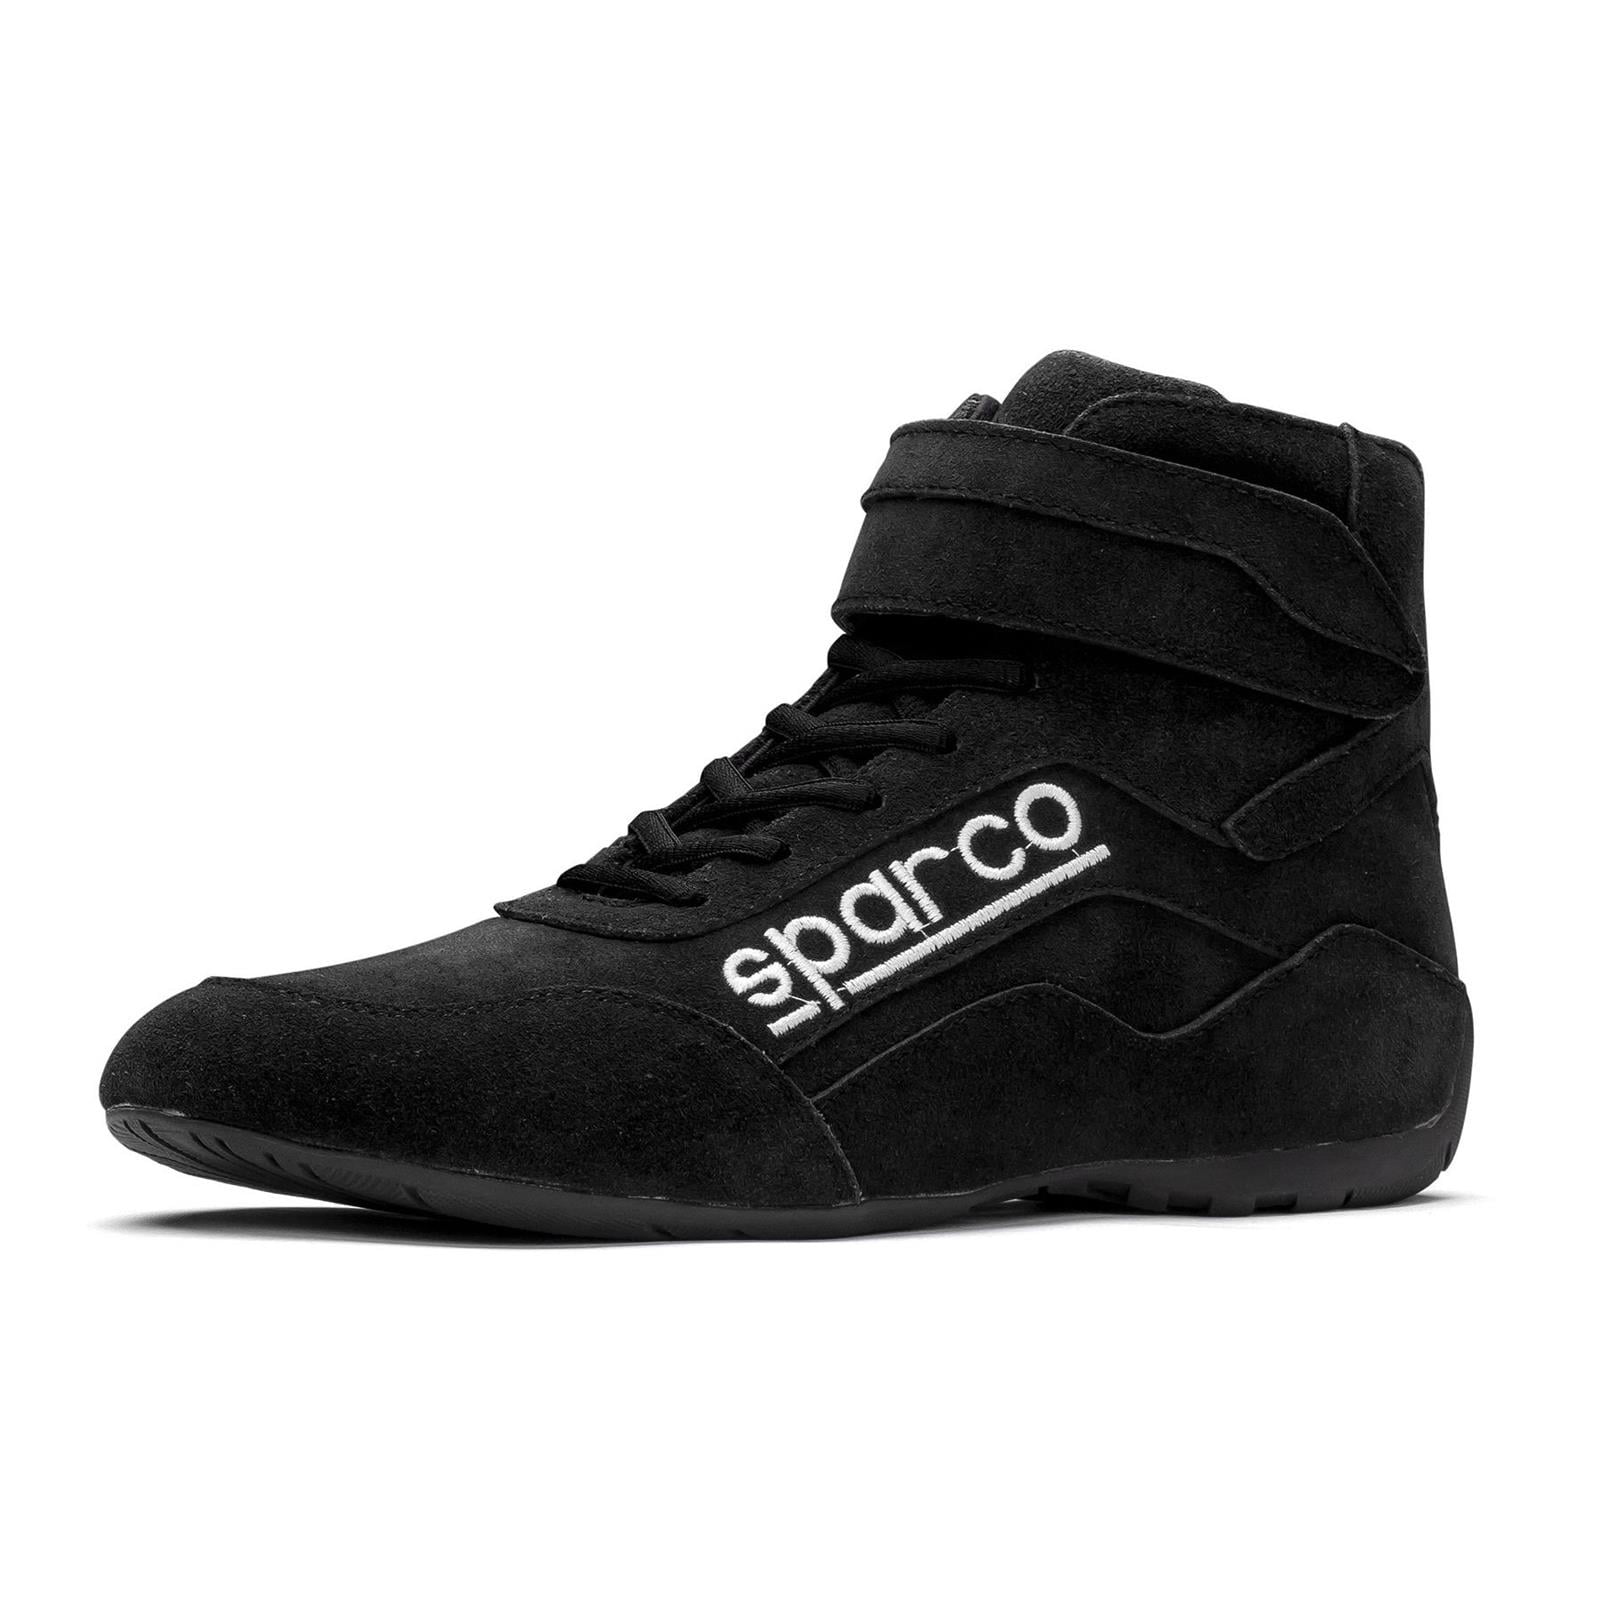 Sparco Black Aggressive Design Race Series Racing Shoes Size:13-00127013N